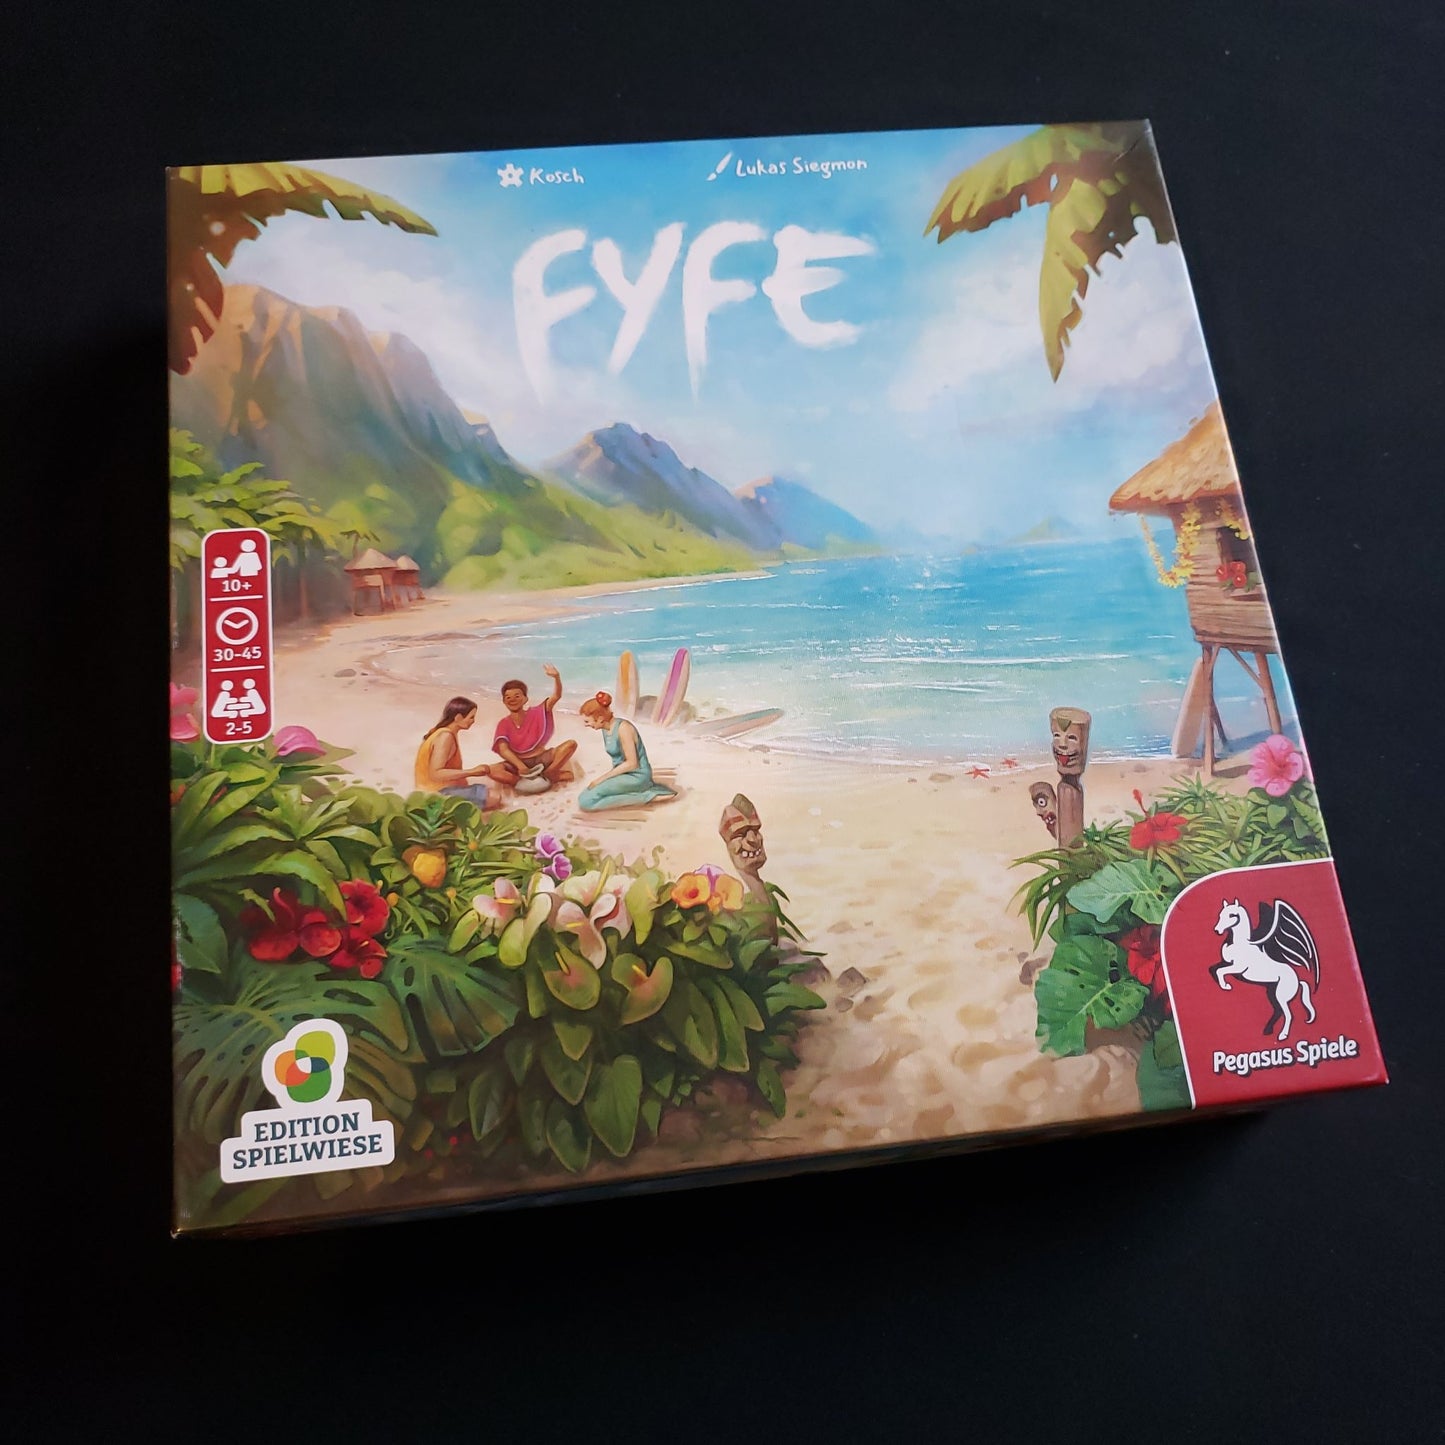 Image shows the front cover of the box of the FYFE board game